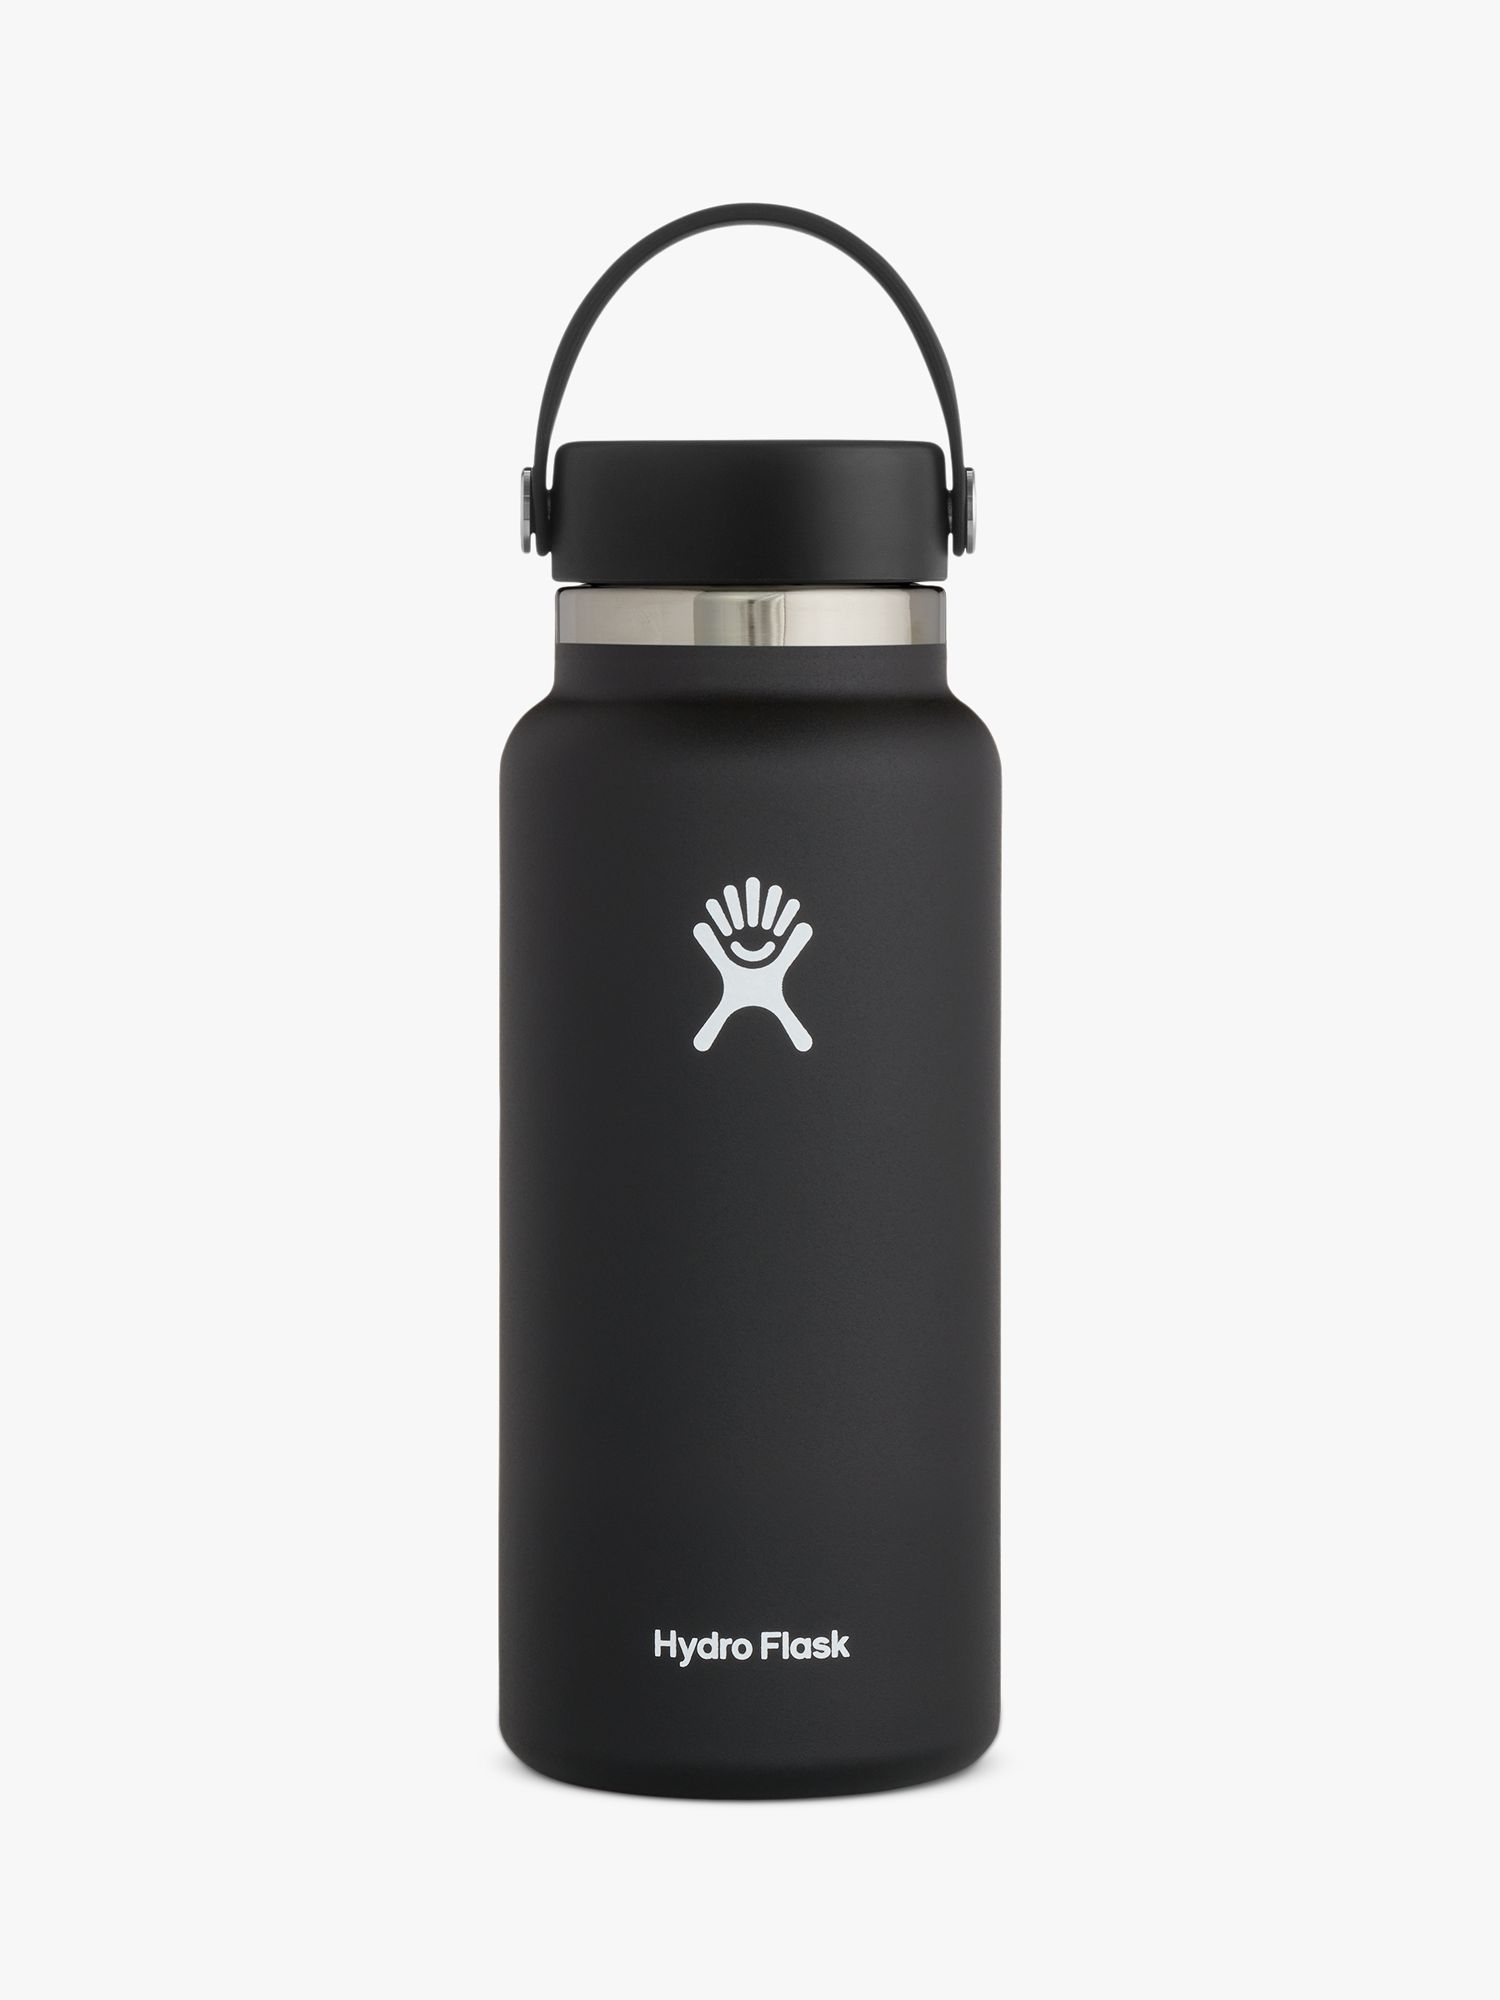 Hydro Flask Double Wall Vacuum Insulated Stainless Steel Wide Drinks Bottle, 946ml, Black